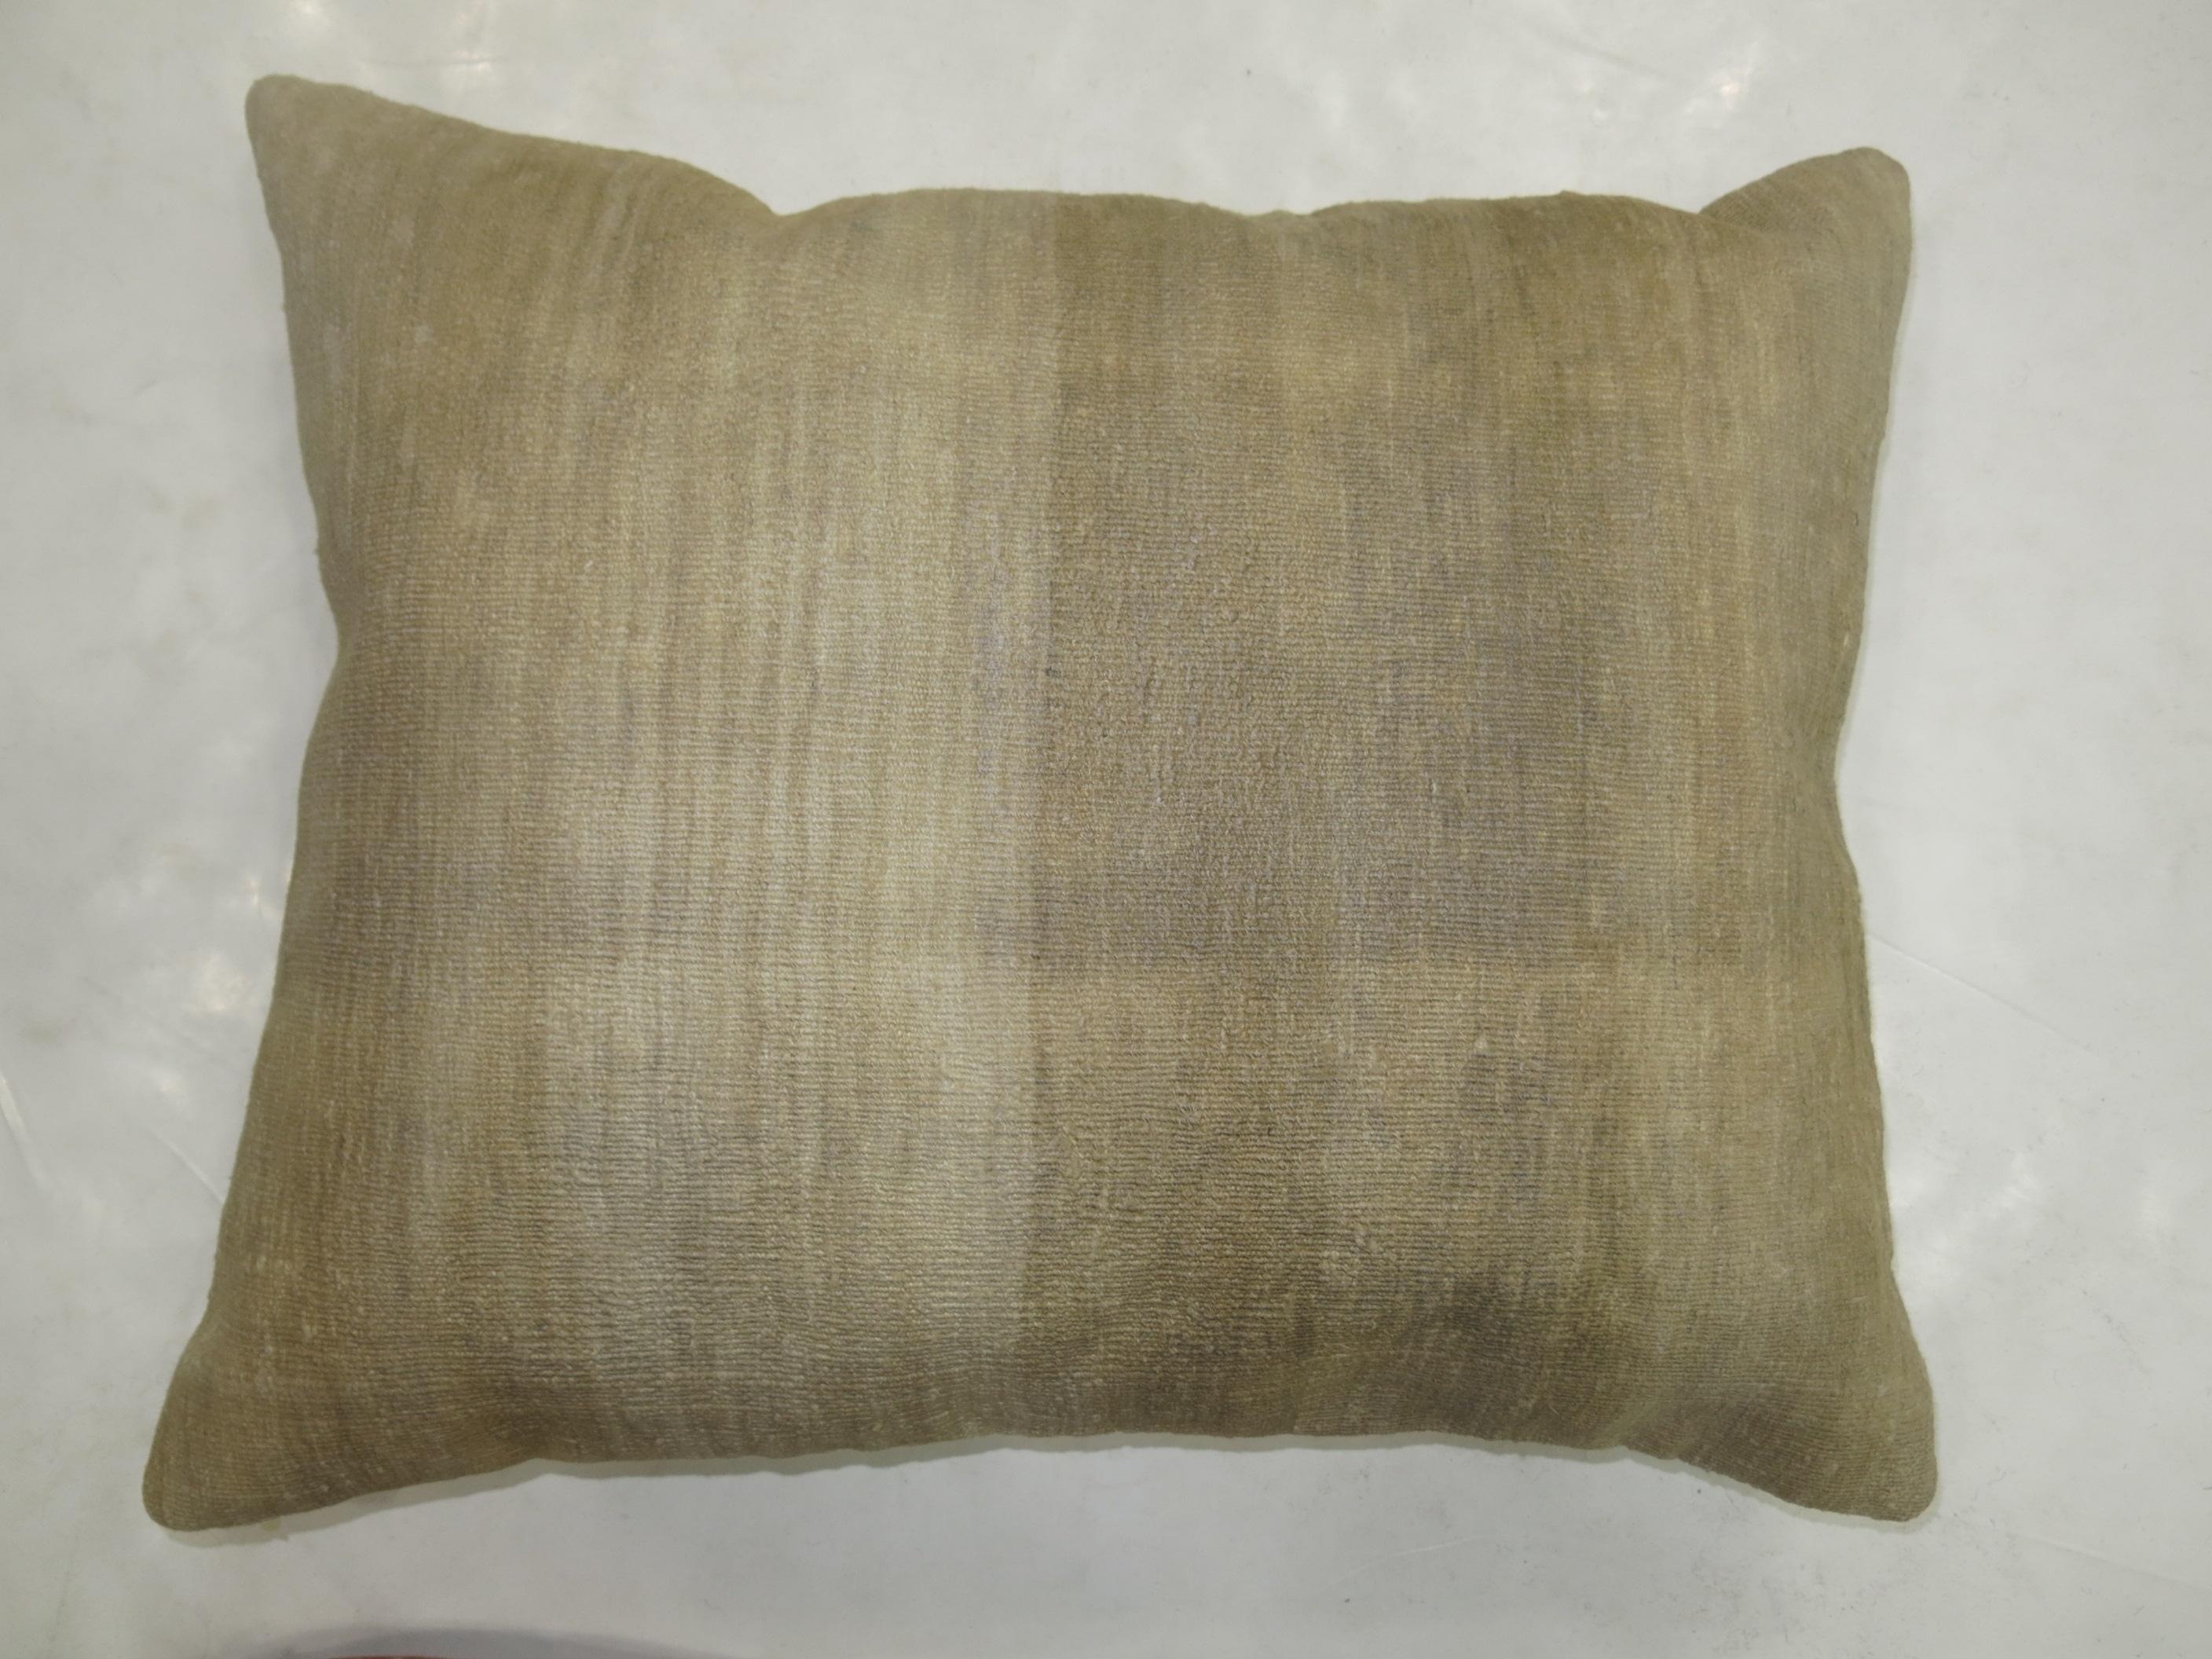 Minimalist Turkish Kilim Pillow In Good Condition For Sale In New York, NY